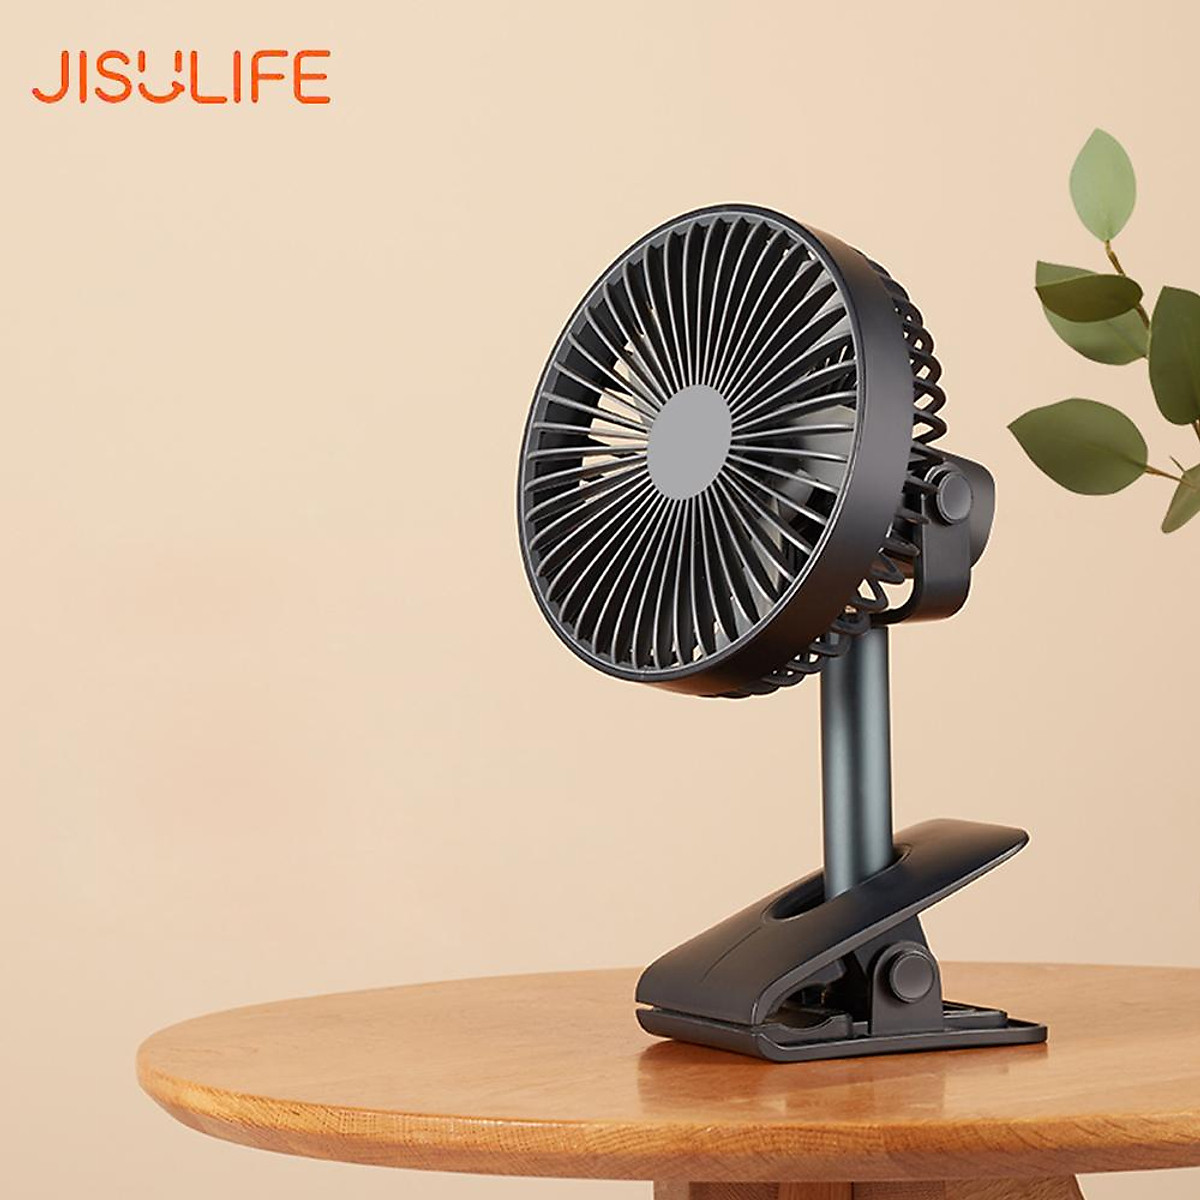 JISULIFE Clipping-on Fan Air Circulation Fan 360 Degree Cooling/4 Speeds Adjustable/Low Noise/Type-C Interface/4000mAh